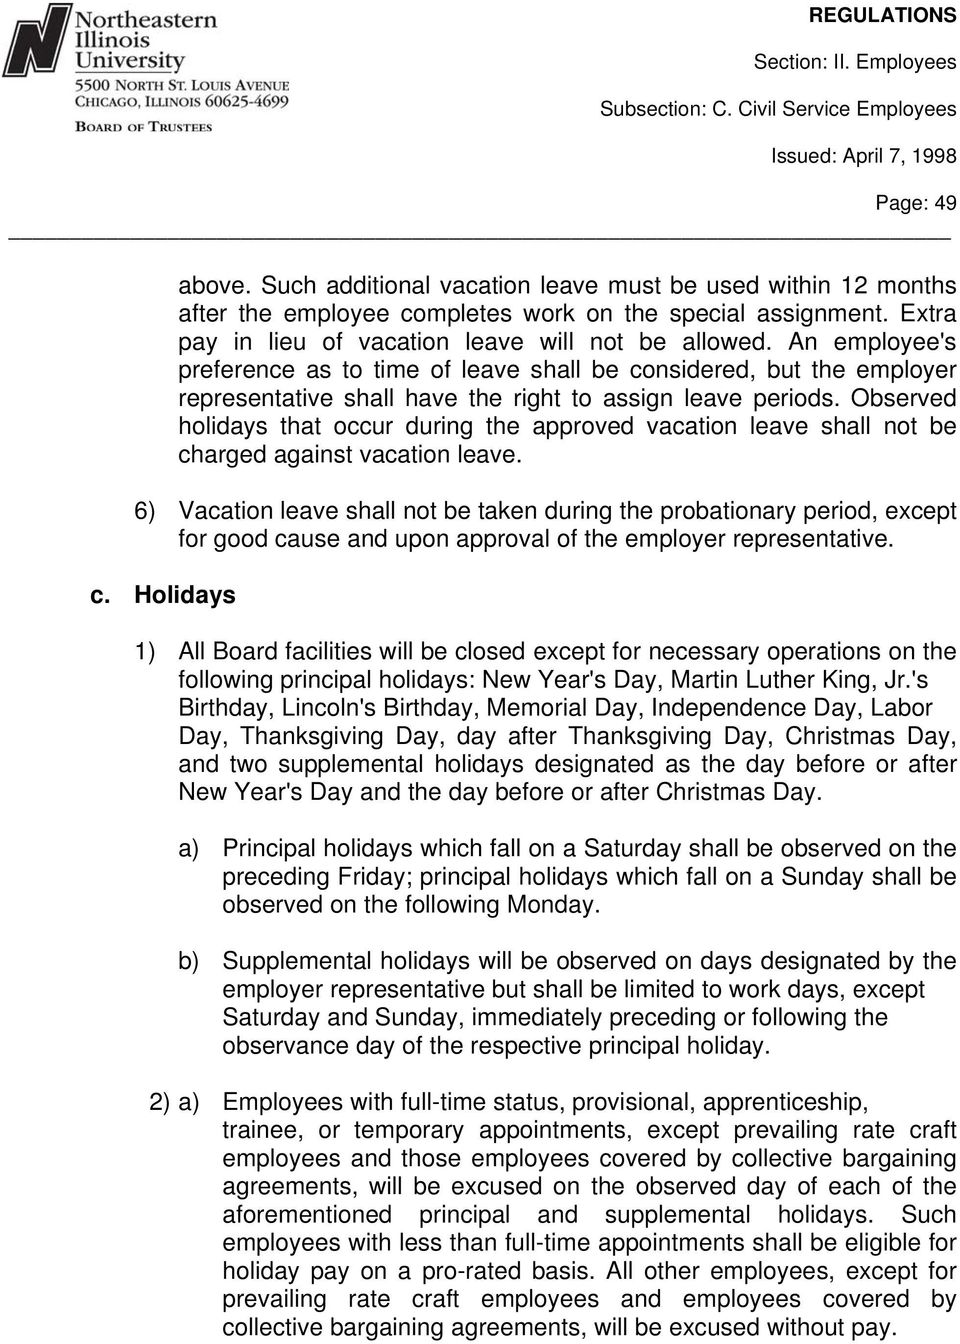 Observed holidays that occur during the approved vacation leave shall not be charged against vacation leave.